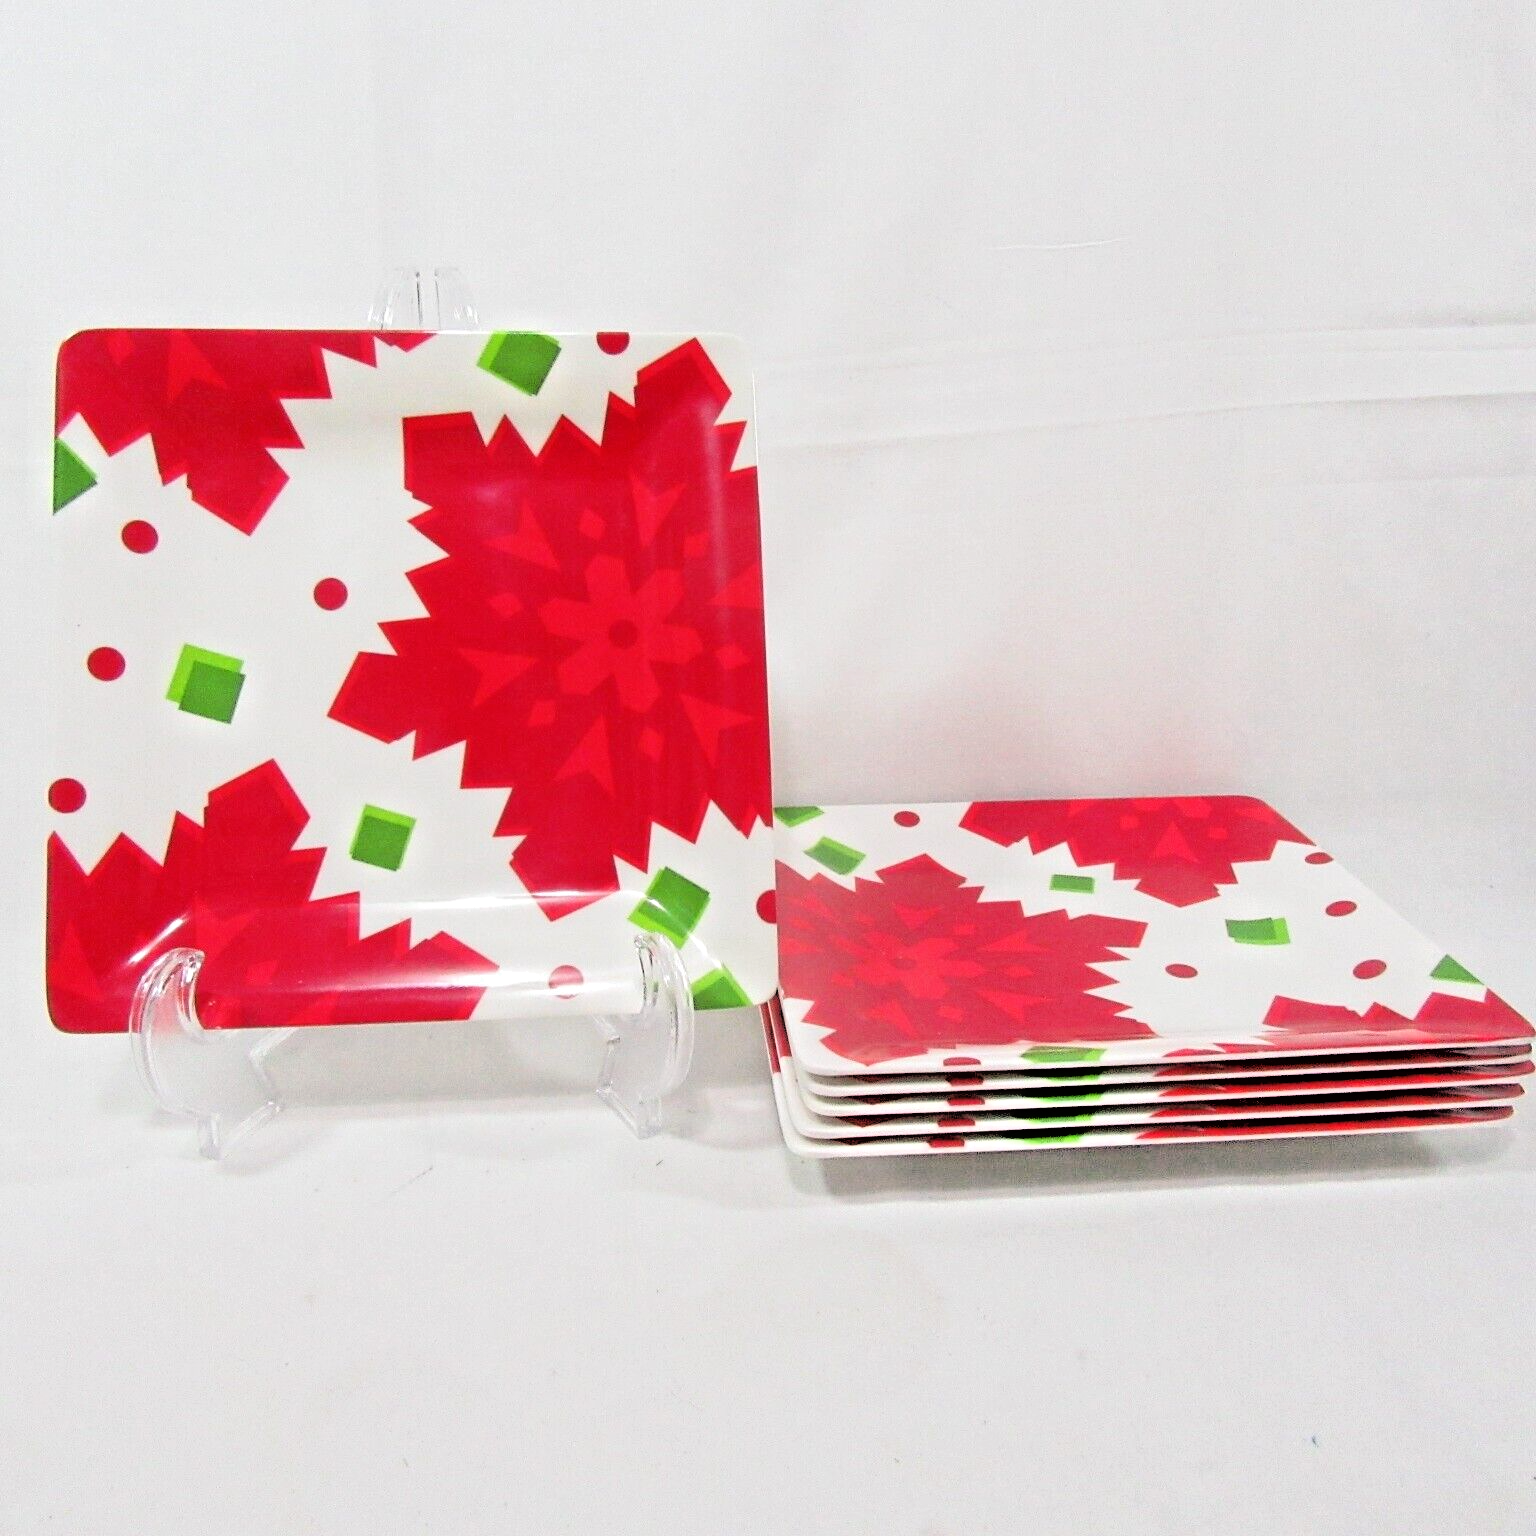 Primary image for Crate and Barrel Red Snowflakes 6-PC Square Melamine Plate Set